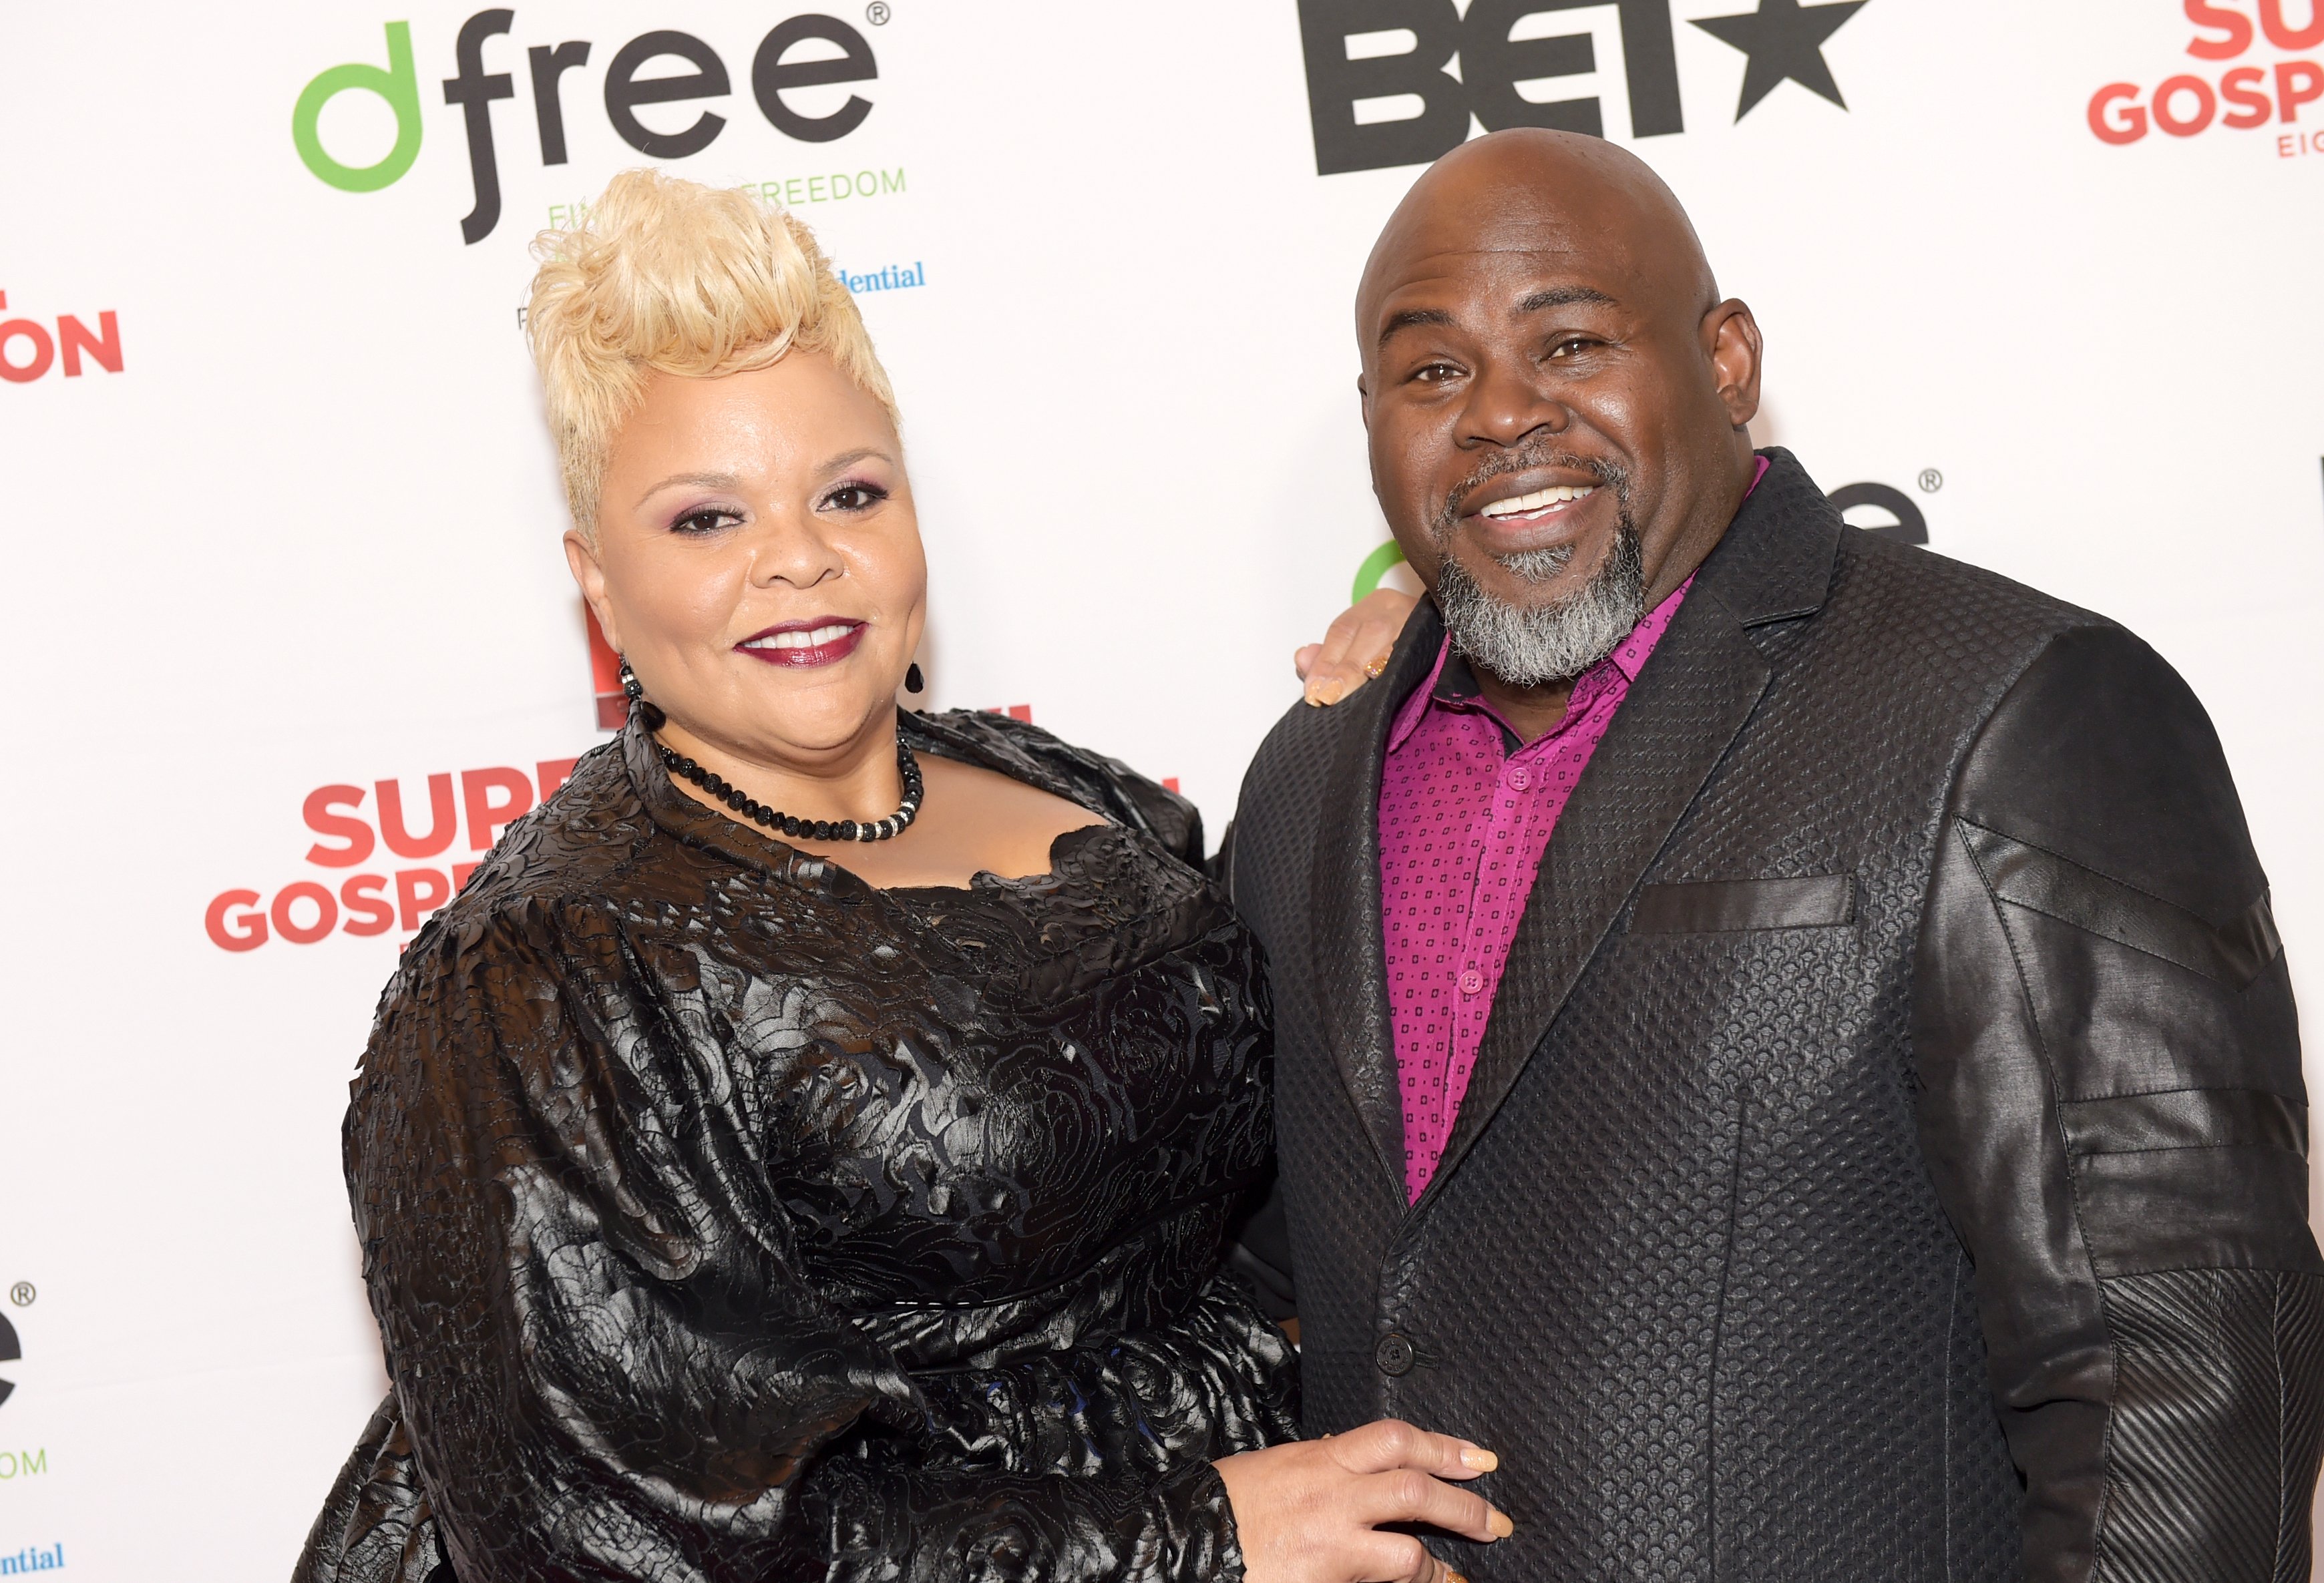  Tamela Mann and David Mann attend the BET Presents Super Bowl Gospel Celebration at Lakewood Church on February 3, 2017 in Houston, Texas. | Photo: GettyImages